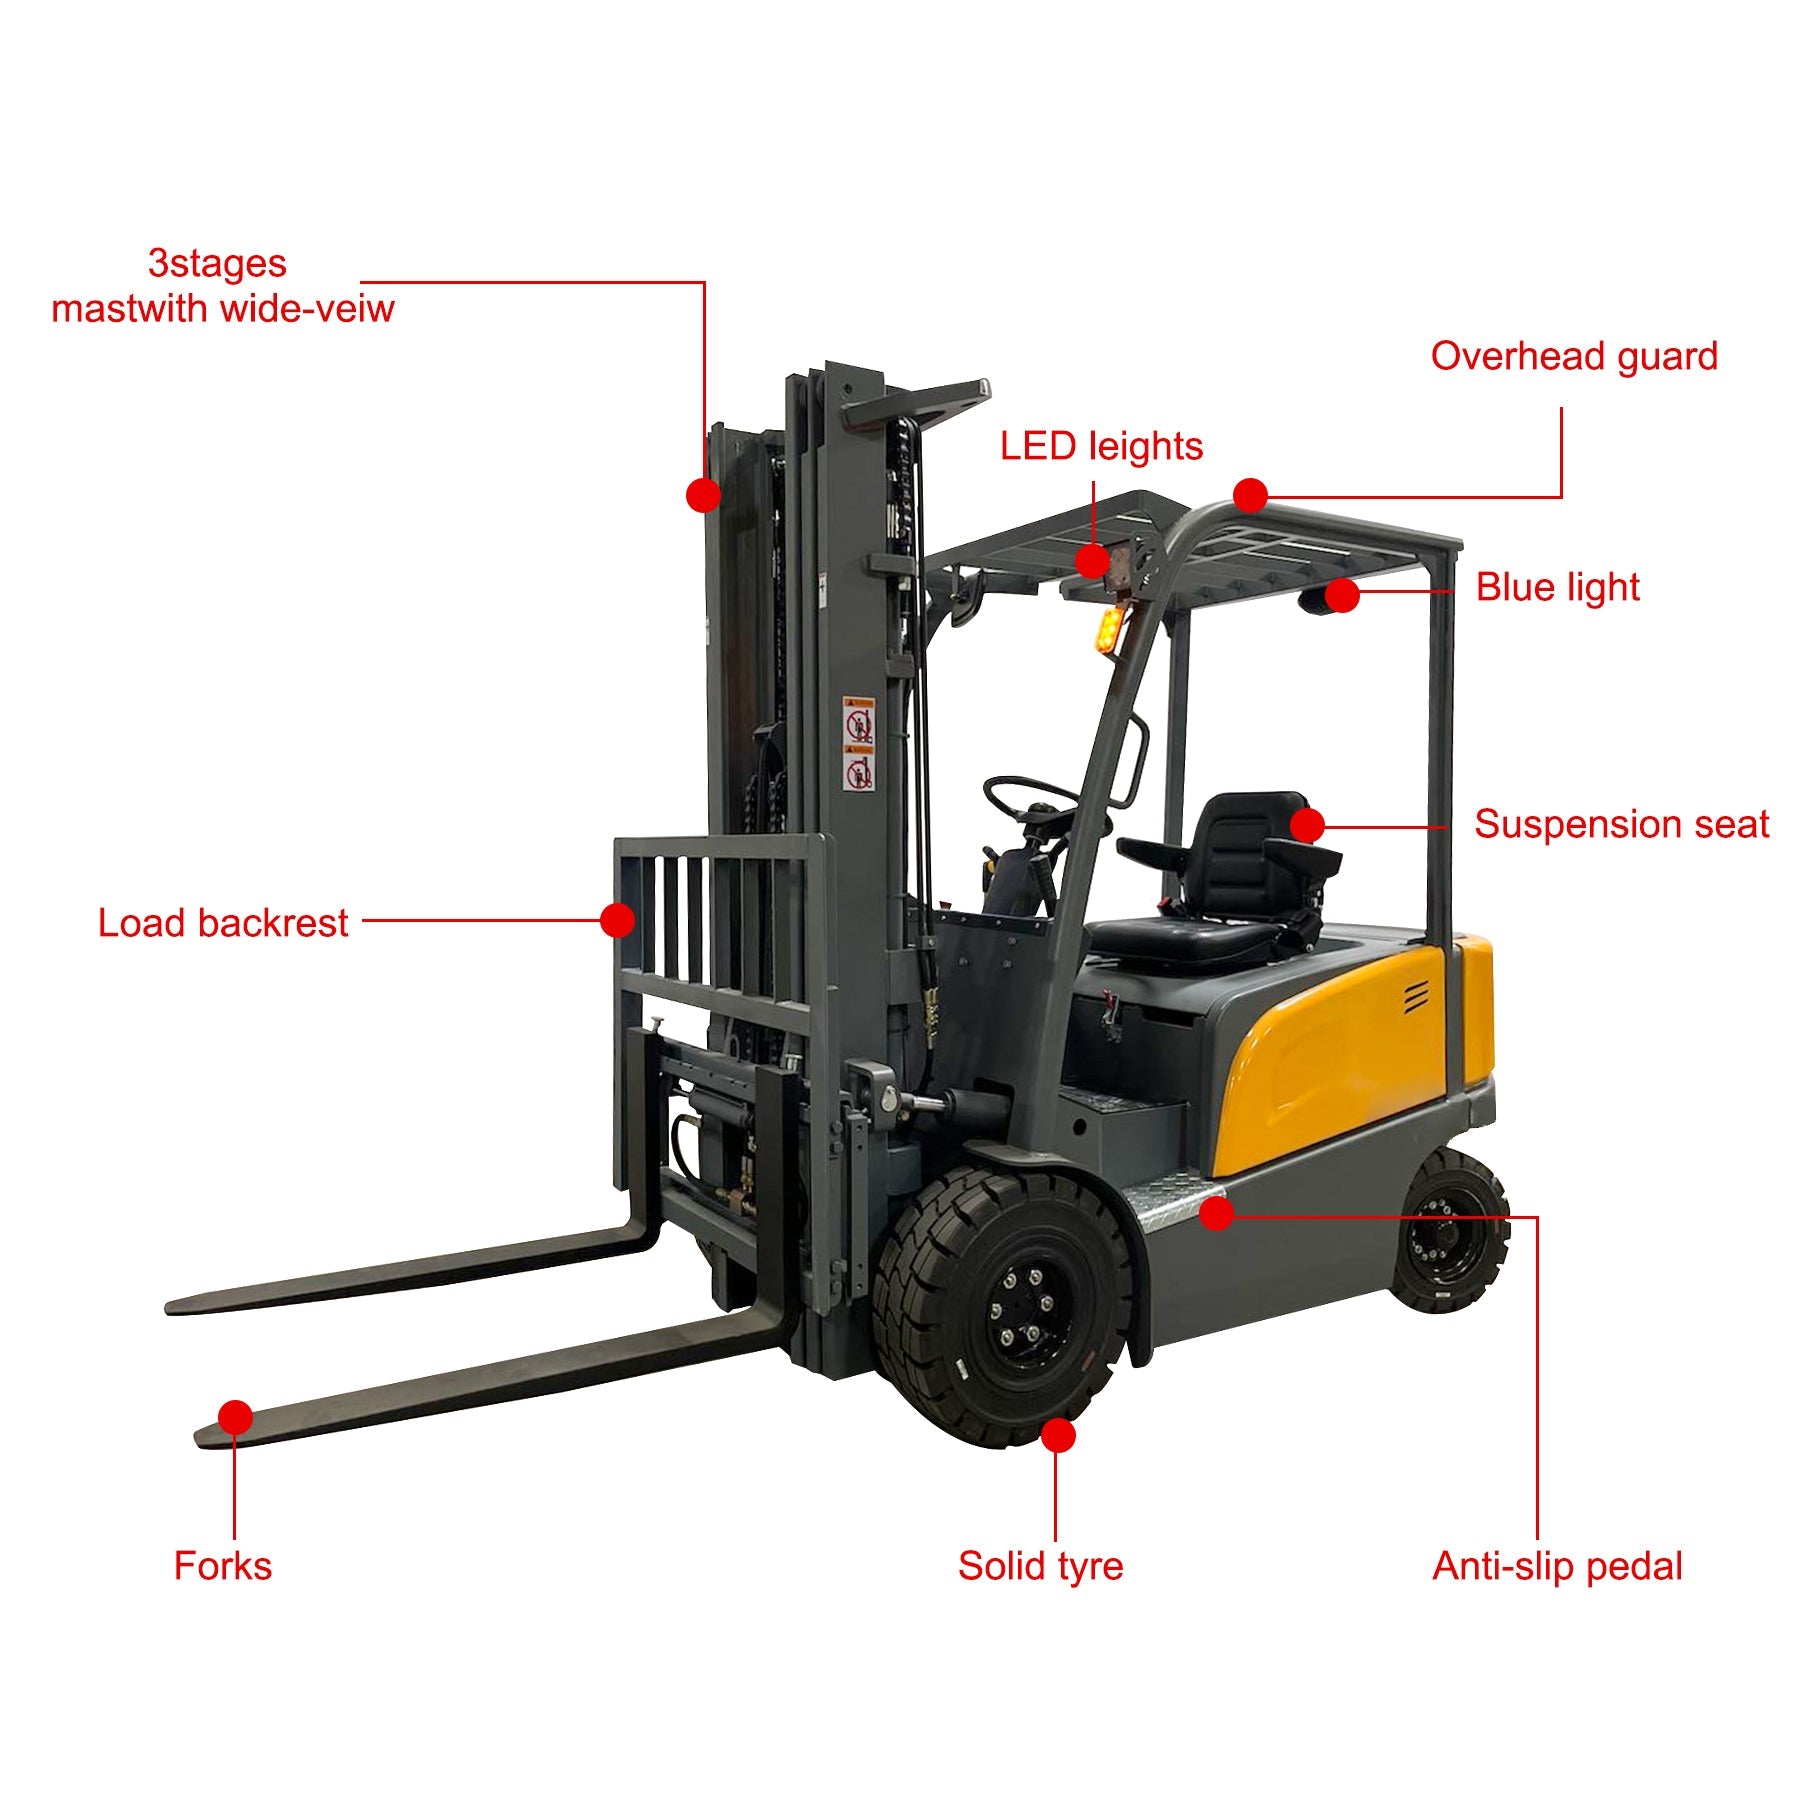 ApolloLift | Lead acid Battery 4-wheel Electric Forklift 5500lbs Cap. 197" Lifting A-4004